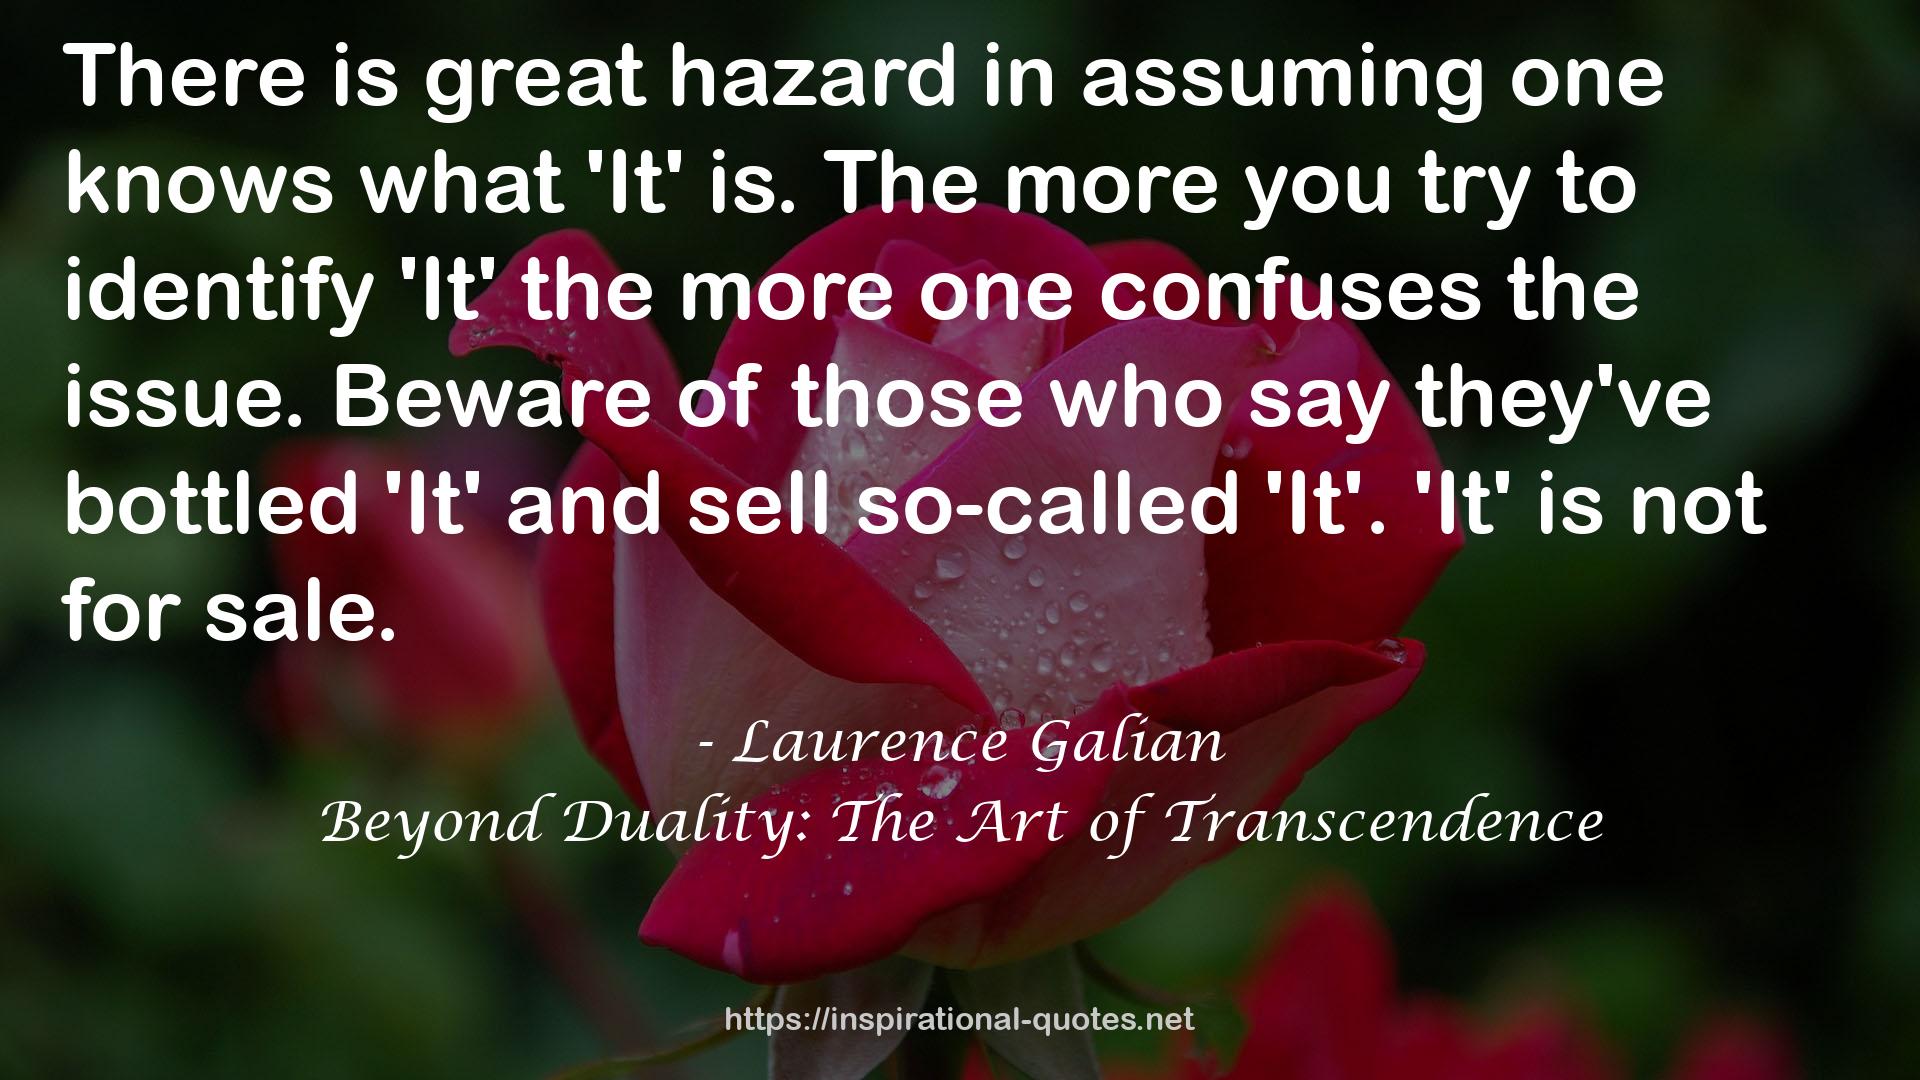 Beyond Duality: The Art of Transcendence QUOTES